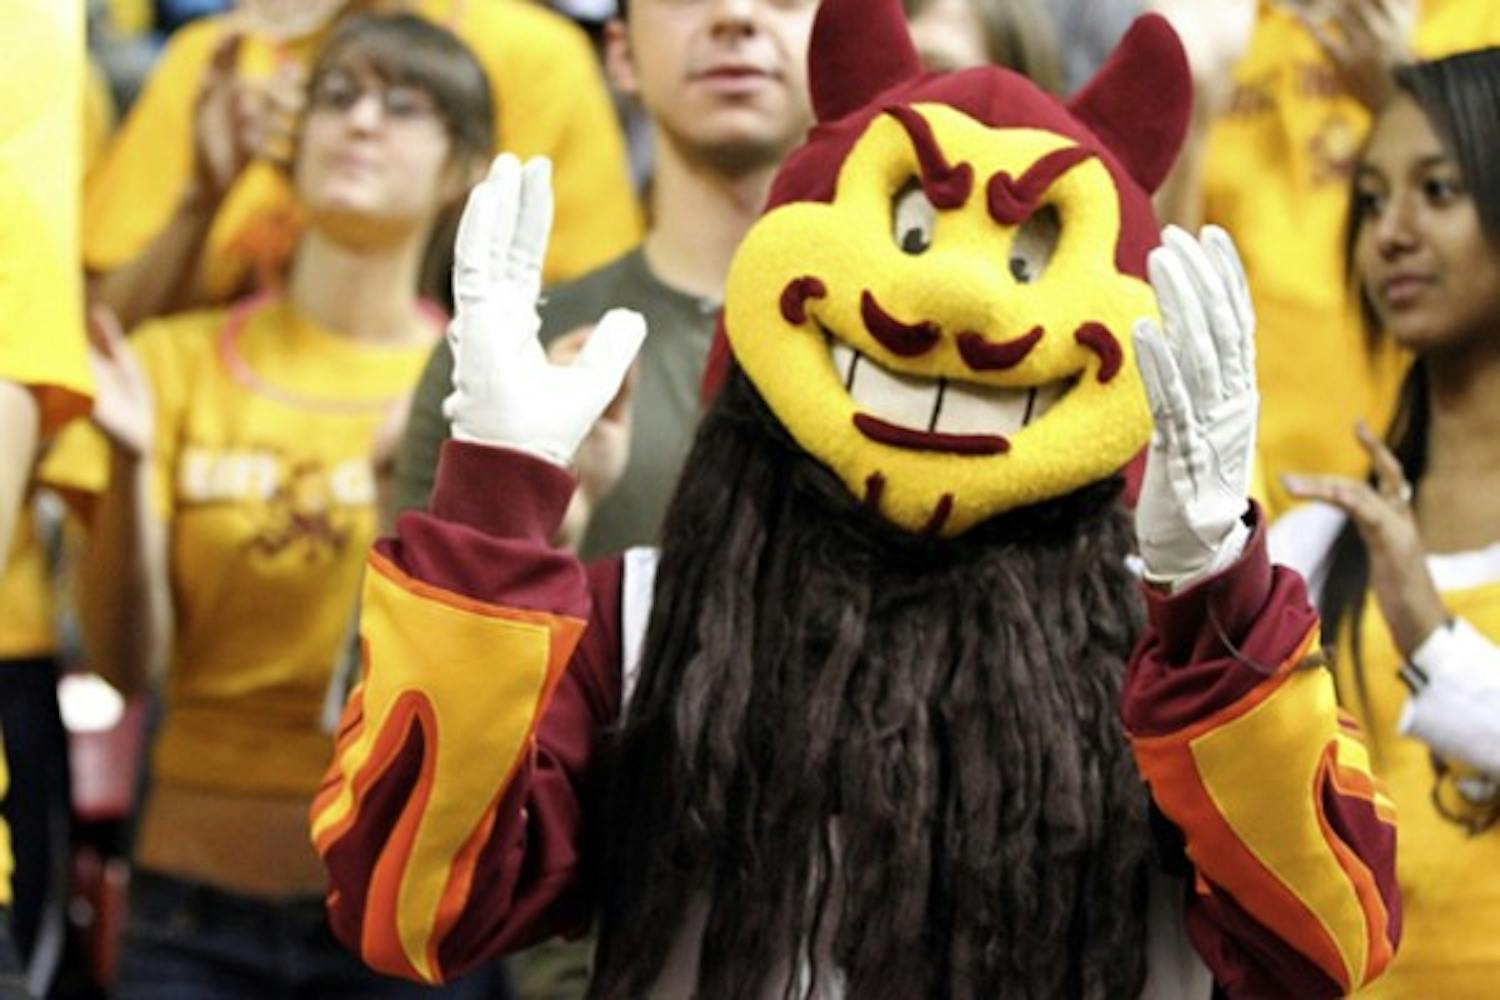 Sparky shows his support for No Shave November by wearing a beard to the James Harden "Fear the Beard" night at the men's basketball game Friday night. (Photo by Sam Rosenbaum)